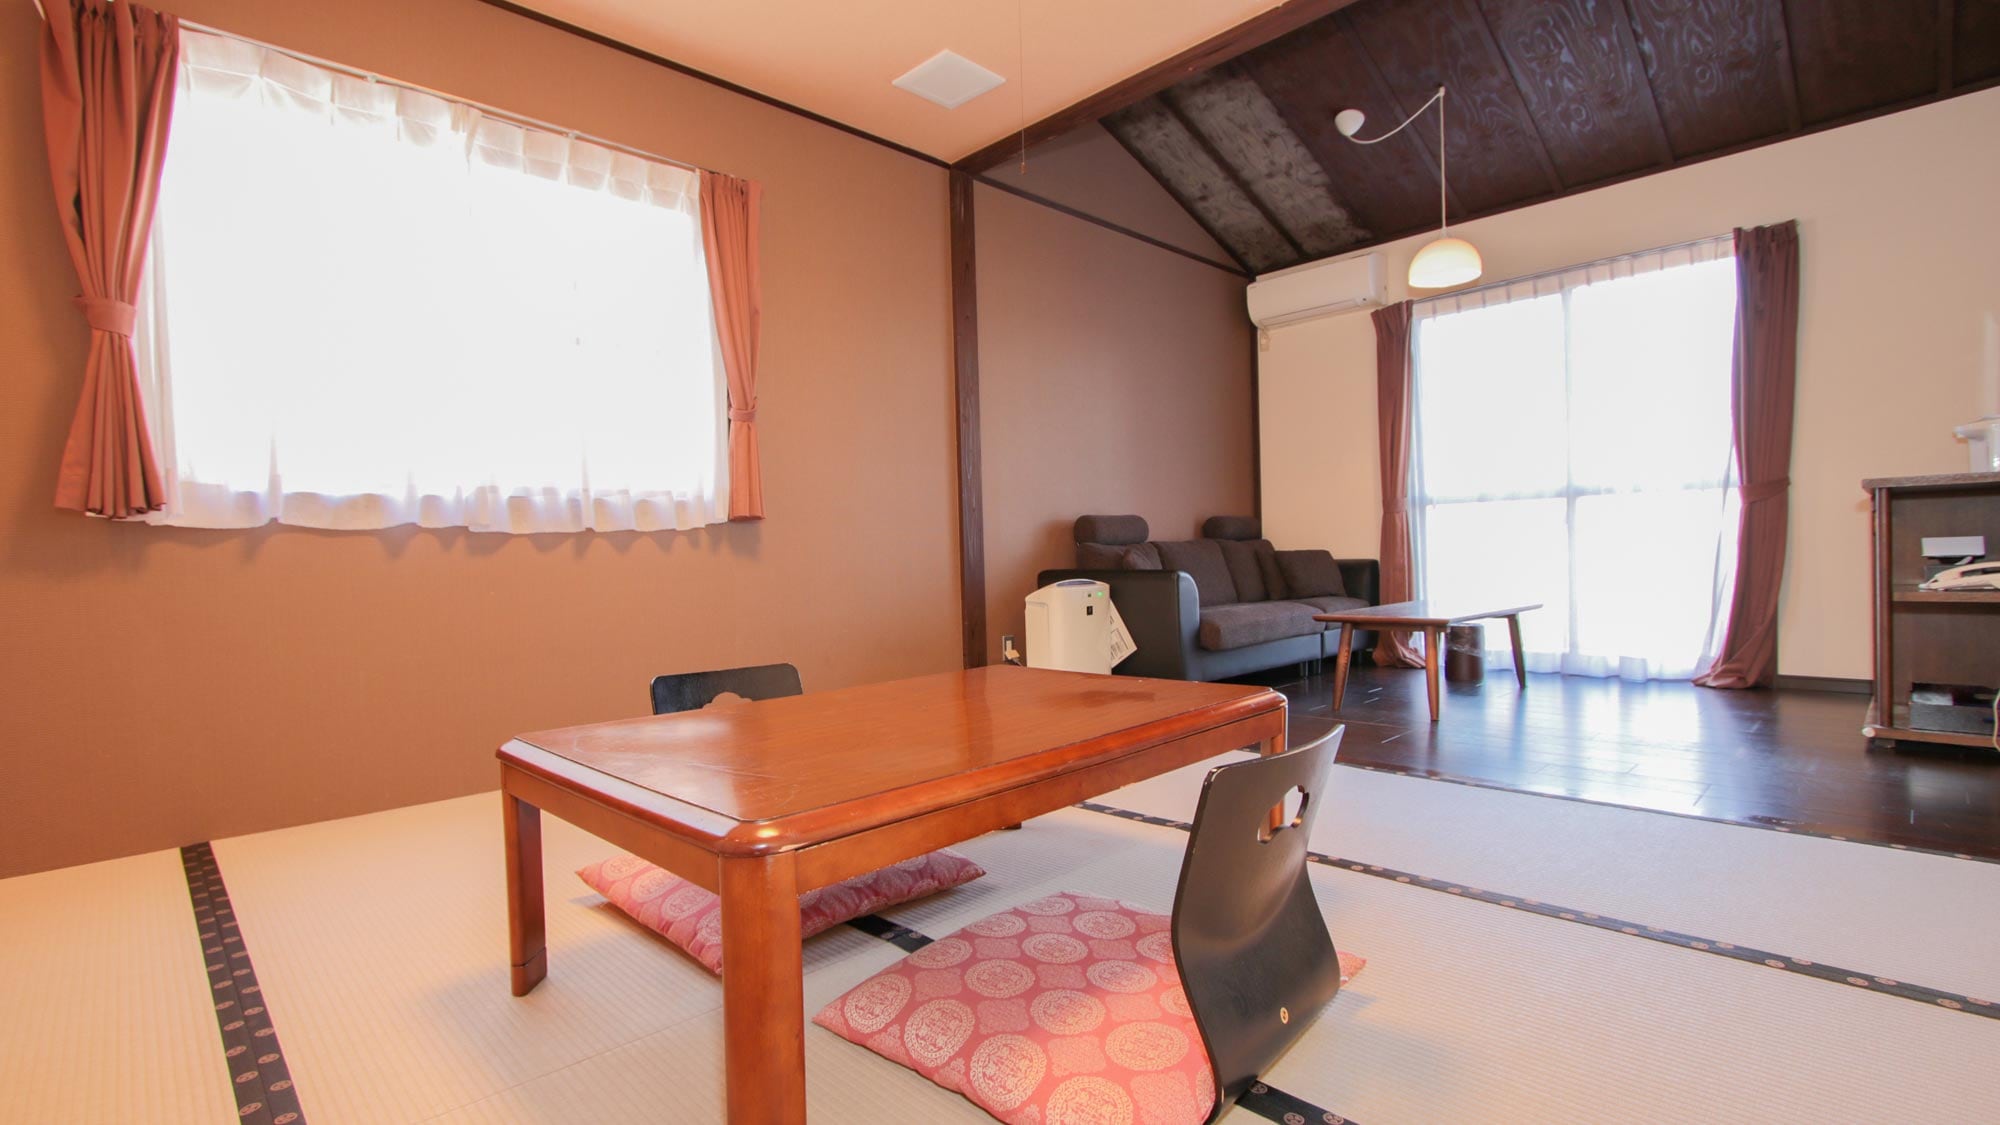 A remote inn (1 unit reserved on the premises with 8 tatami mats + family bath)